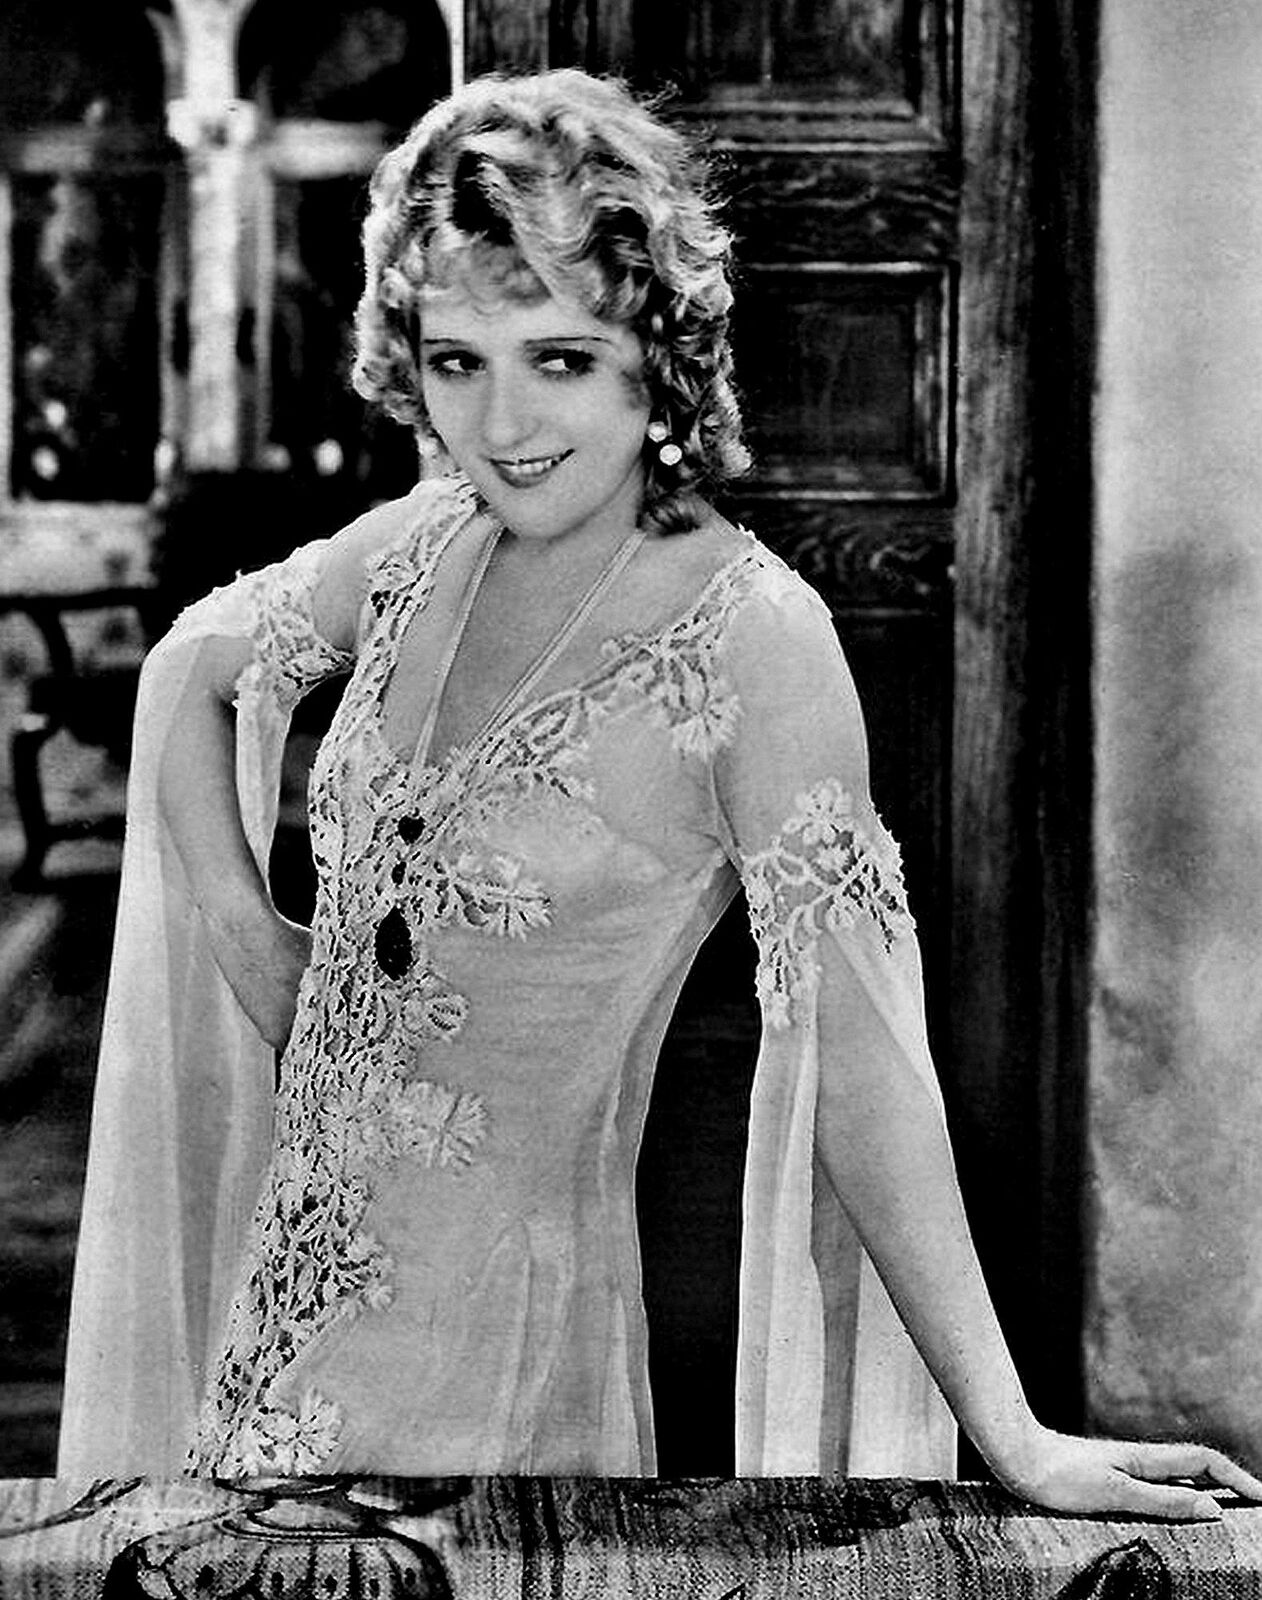 1929 MARY PICKFORD in THE TAMING OF THE SHREW  Photo  (184-L )